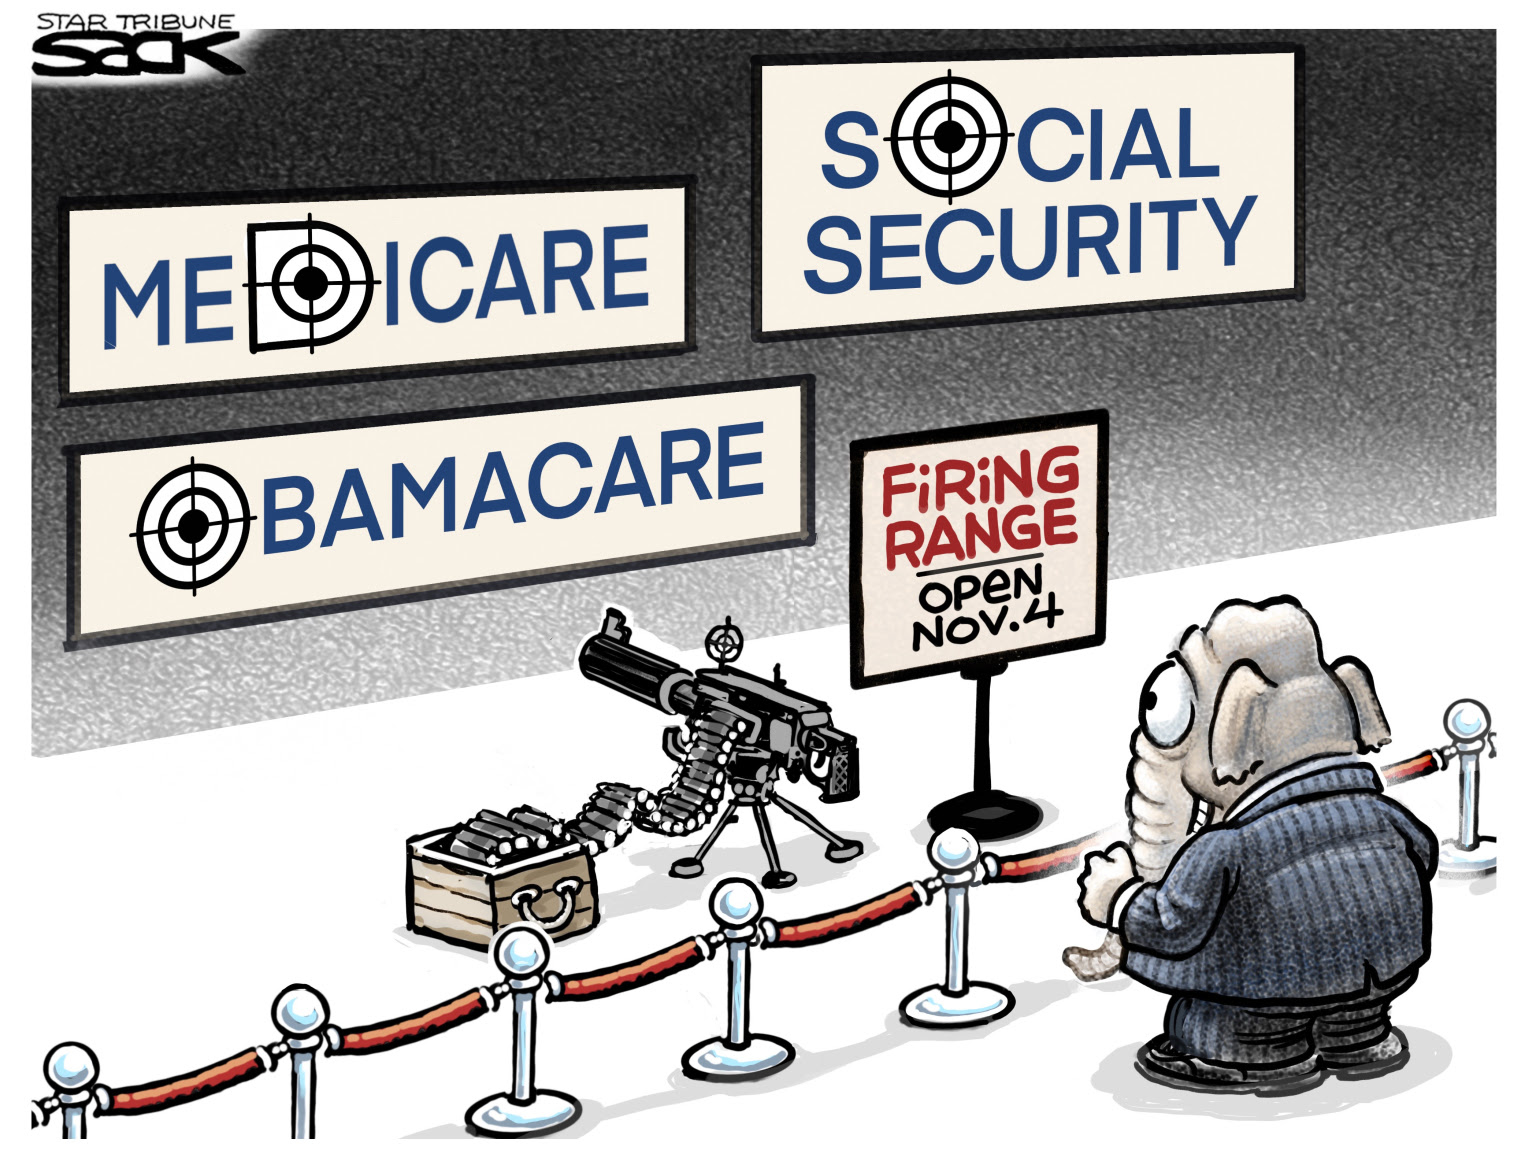 Republicans plan to kill Social Security and Medicare